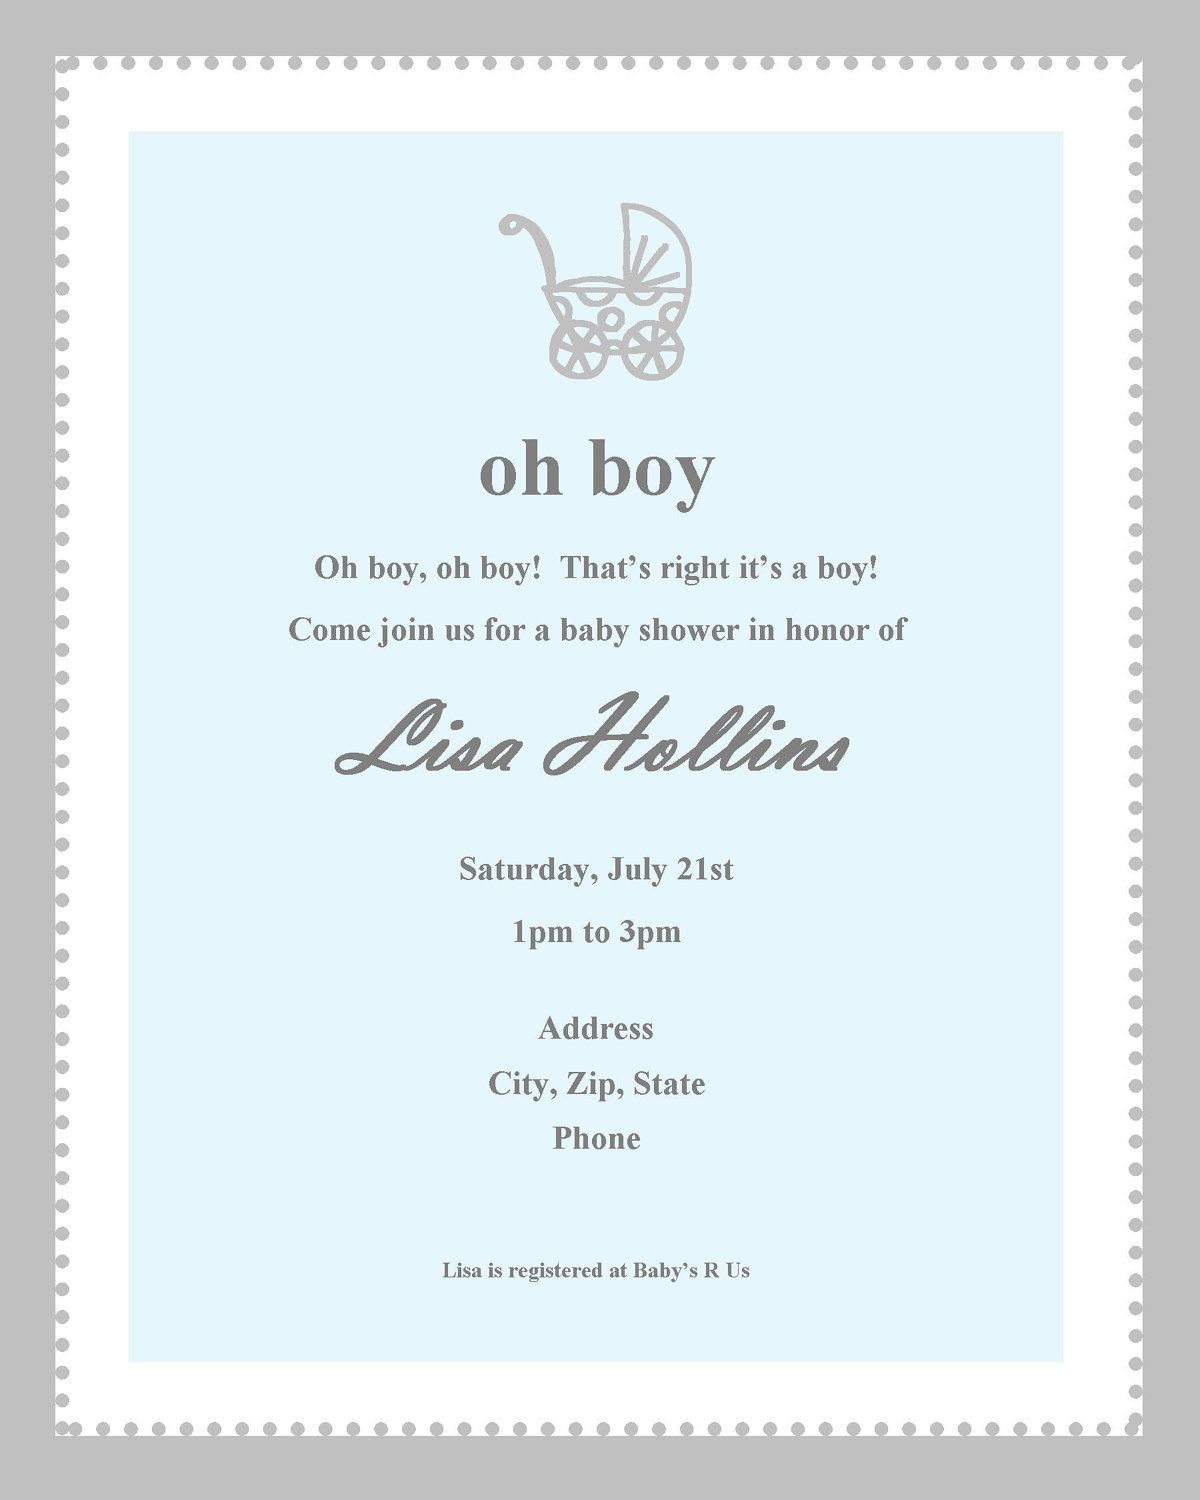 Full Size of Baby Shower:delightful Baby Shower Invitation Wording Picture Designs Baby Shower Invitation Wording Baby Shower At The Park Baby Shower Hostess Gifts Baby Shower Party Games Cheap Baby Shower Gifts Baby Shower Recipes Baby Shower Quotes Baby Shower Invitation Wording For Boy Invitations Ideas